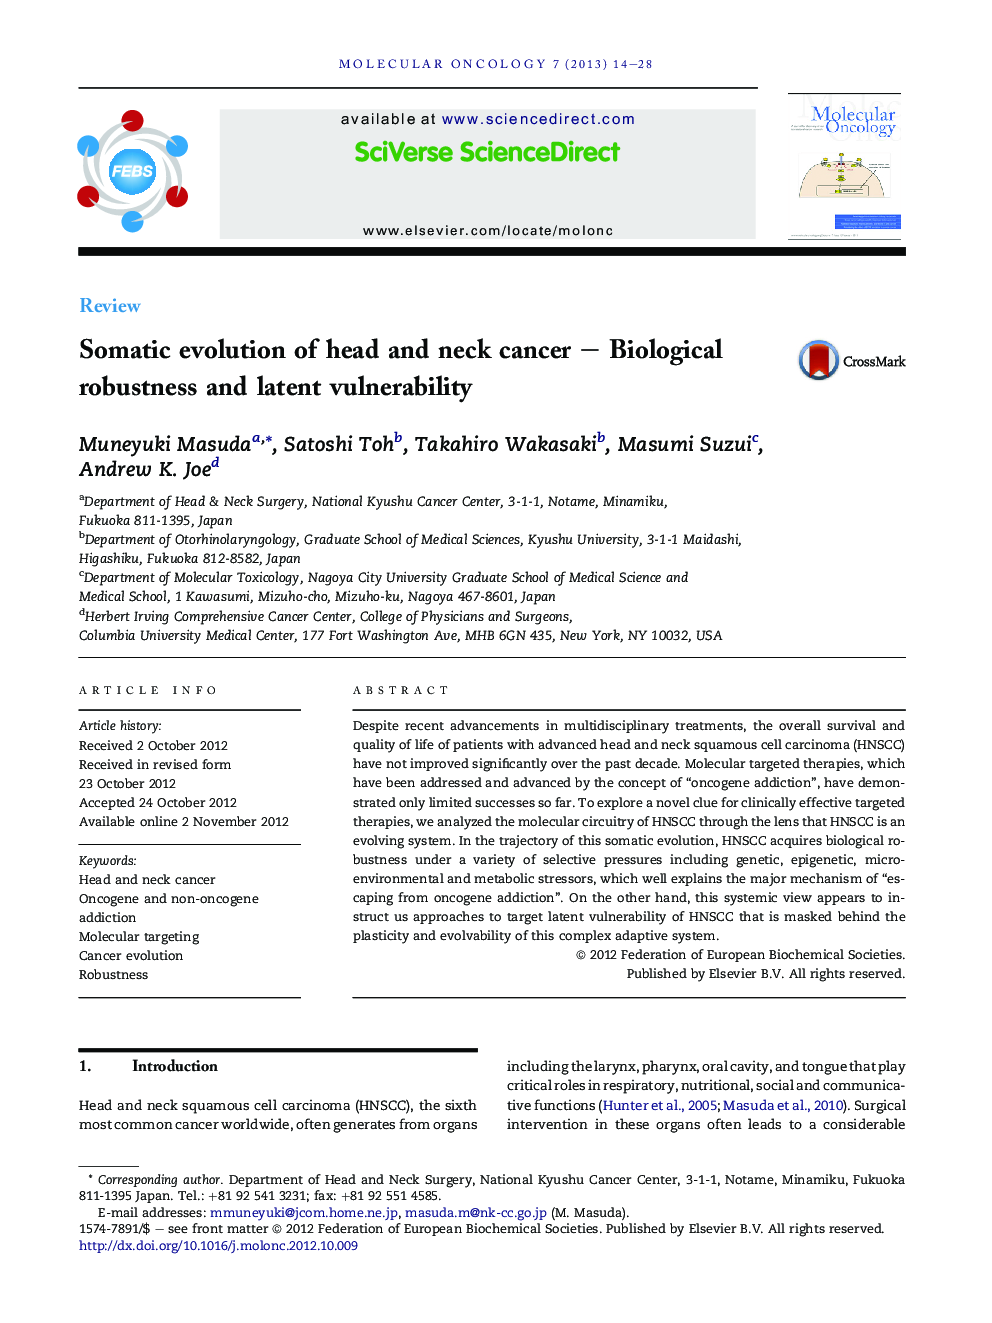 Somatic evolution of head and neck cancer - Biological robustness and latent vulnerability